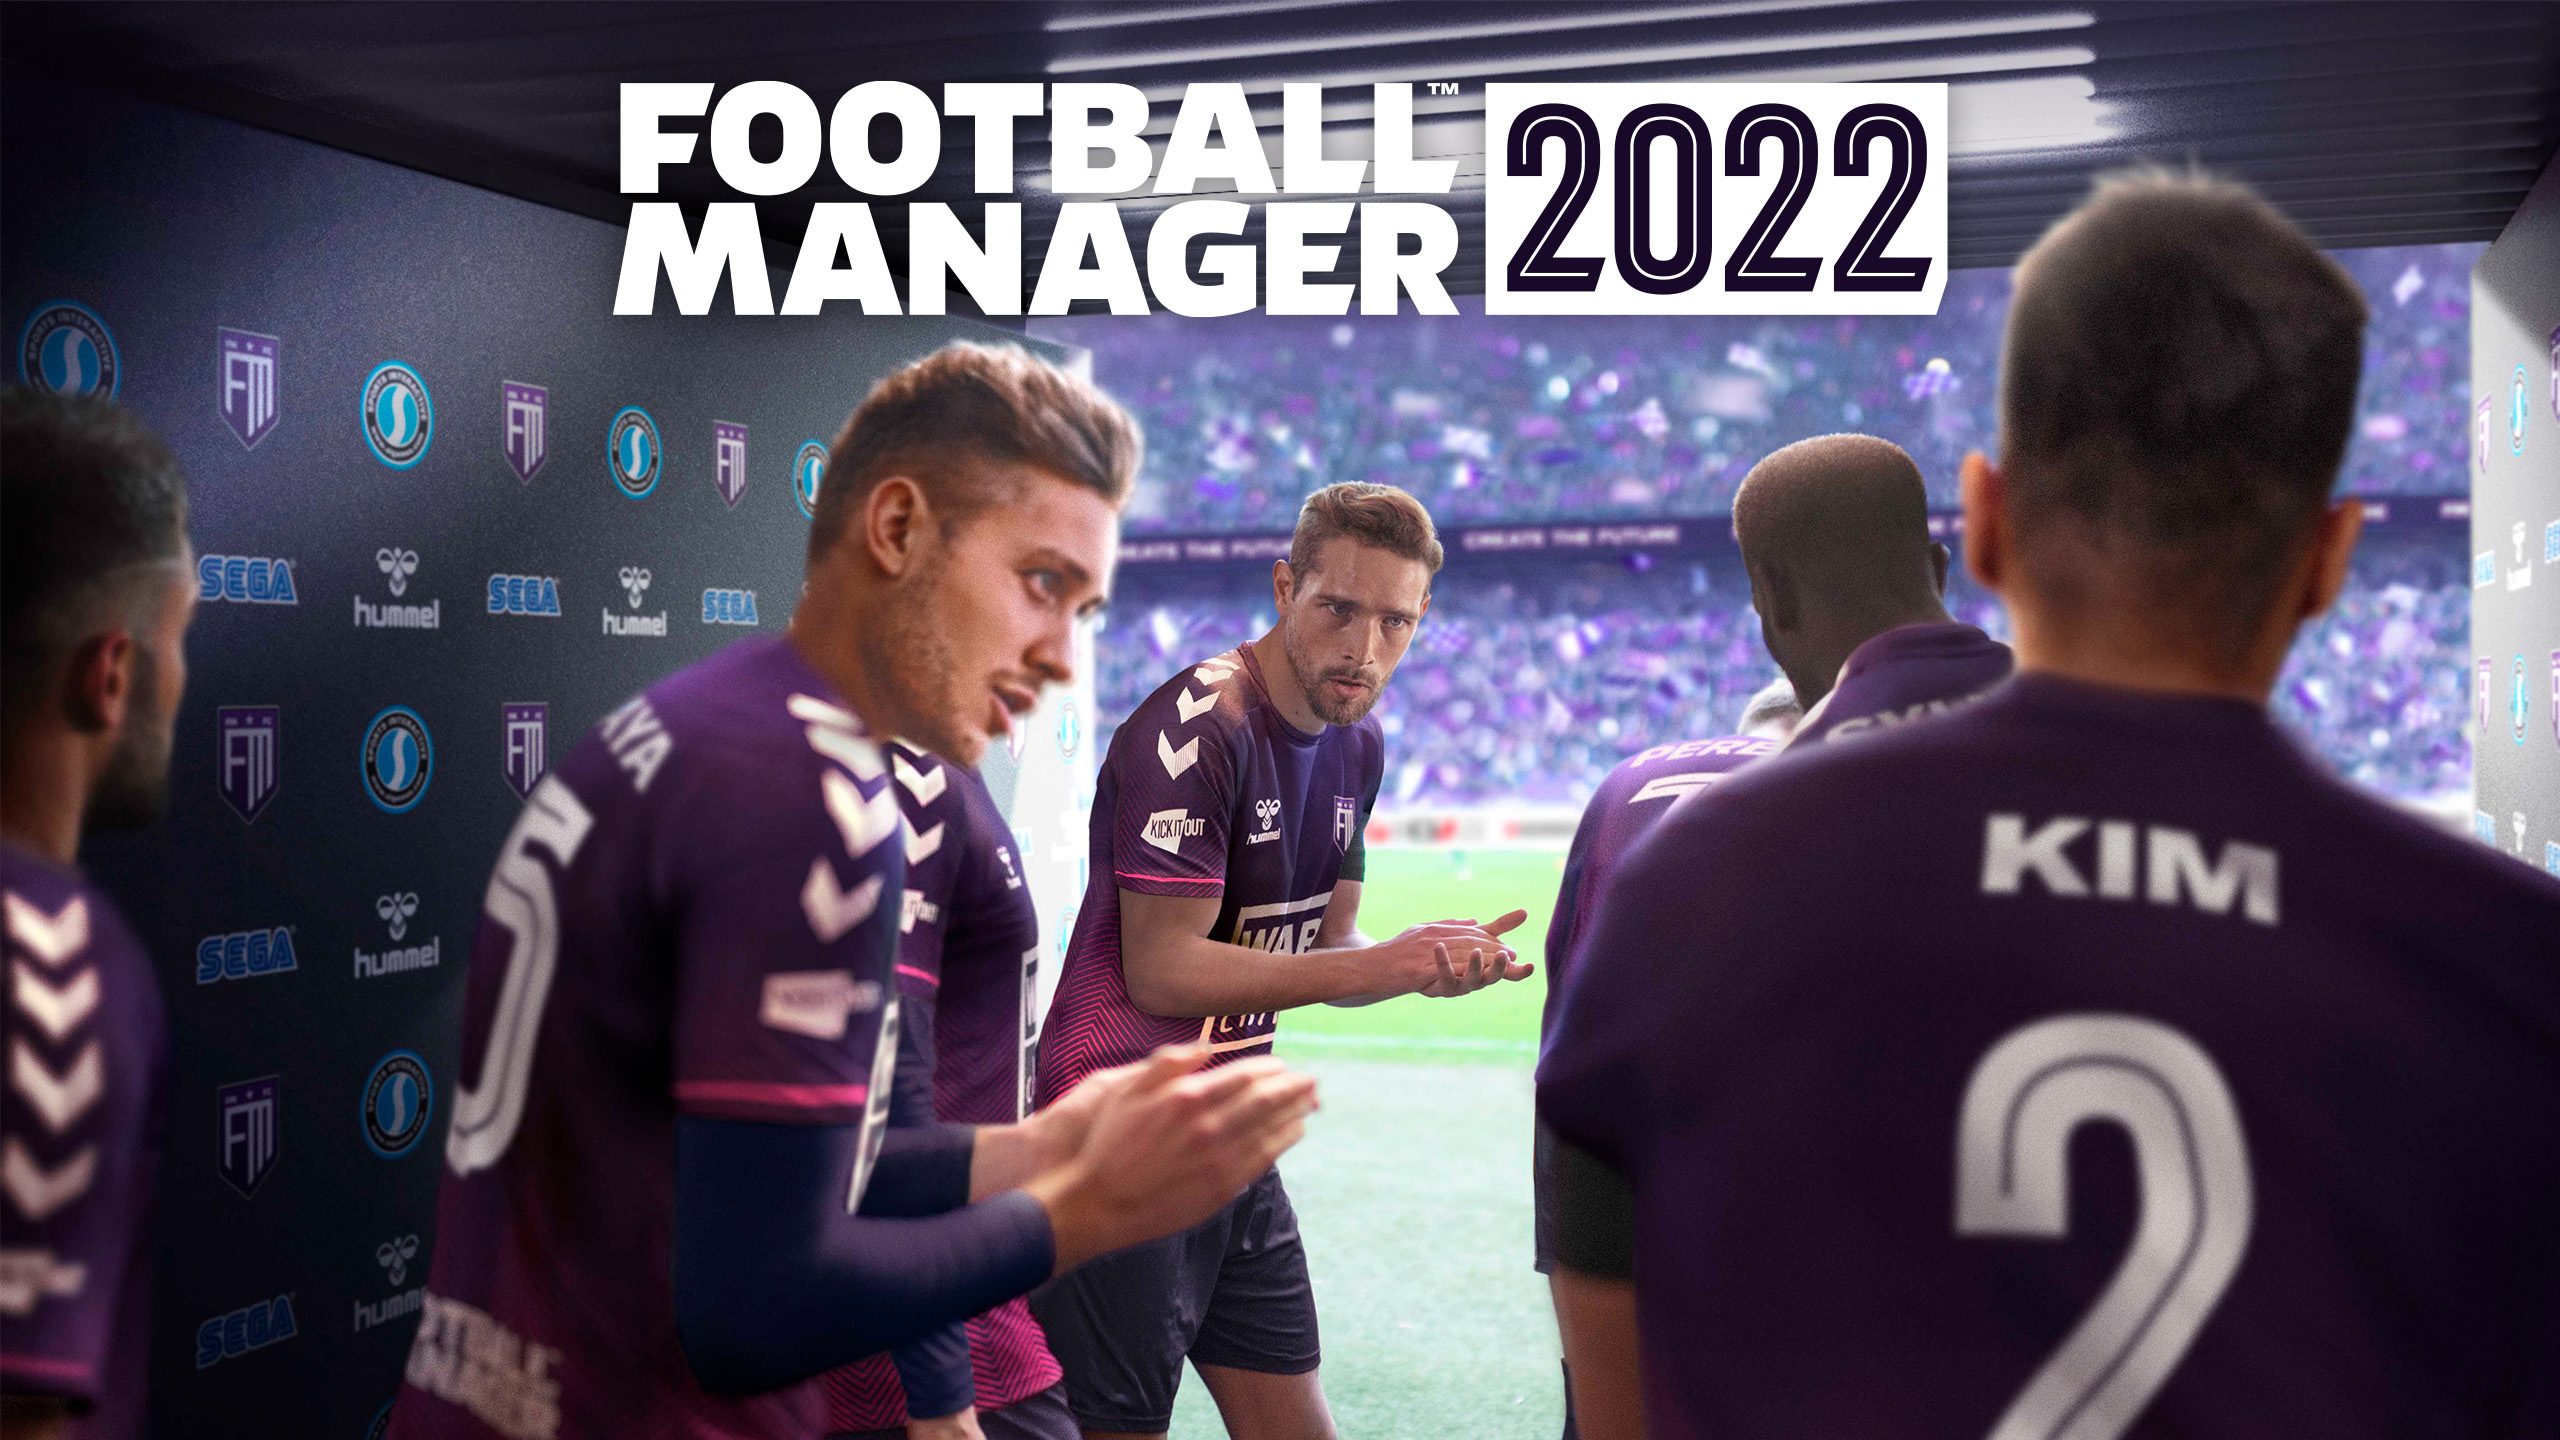 Football Manager 2022 Steam and Metacritic Reviews - Pros and Cons of The Game